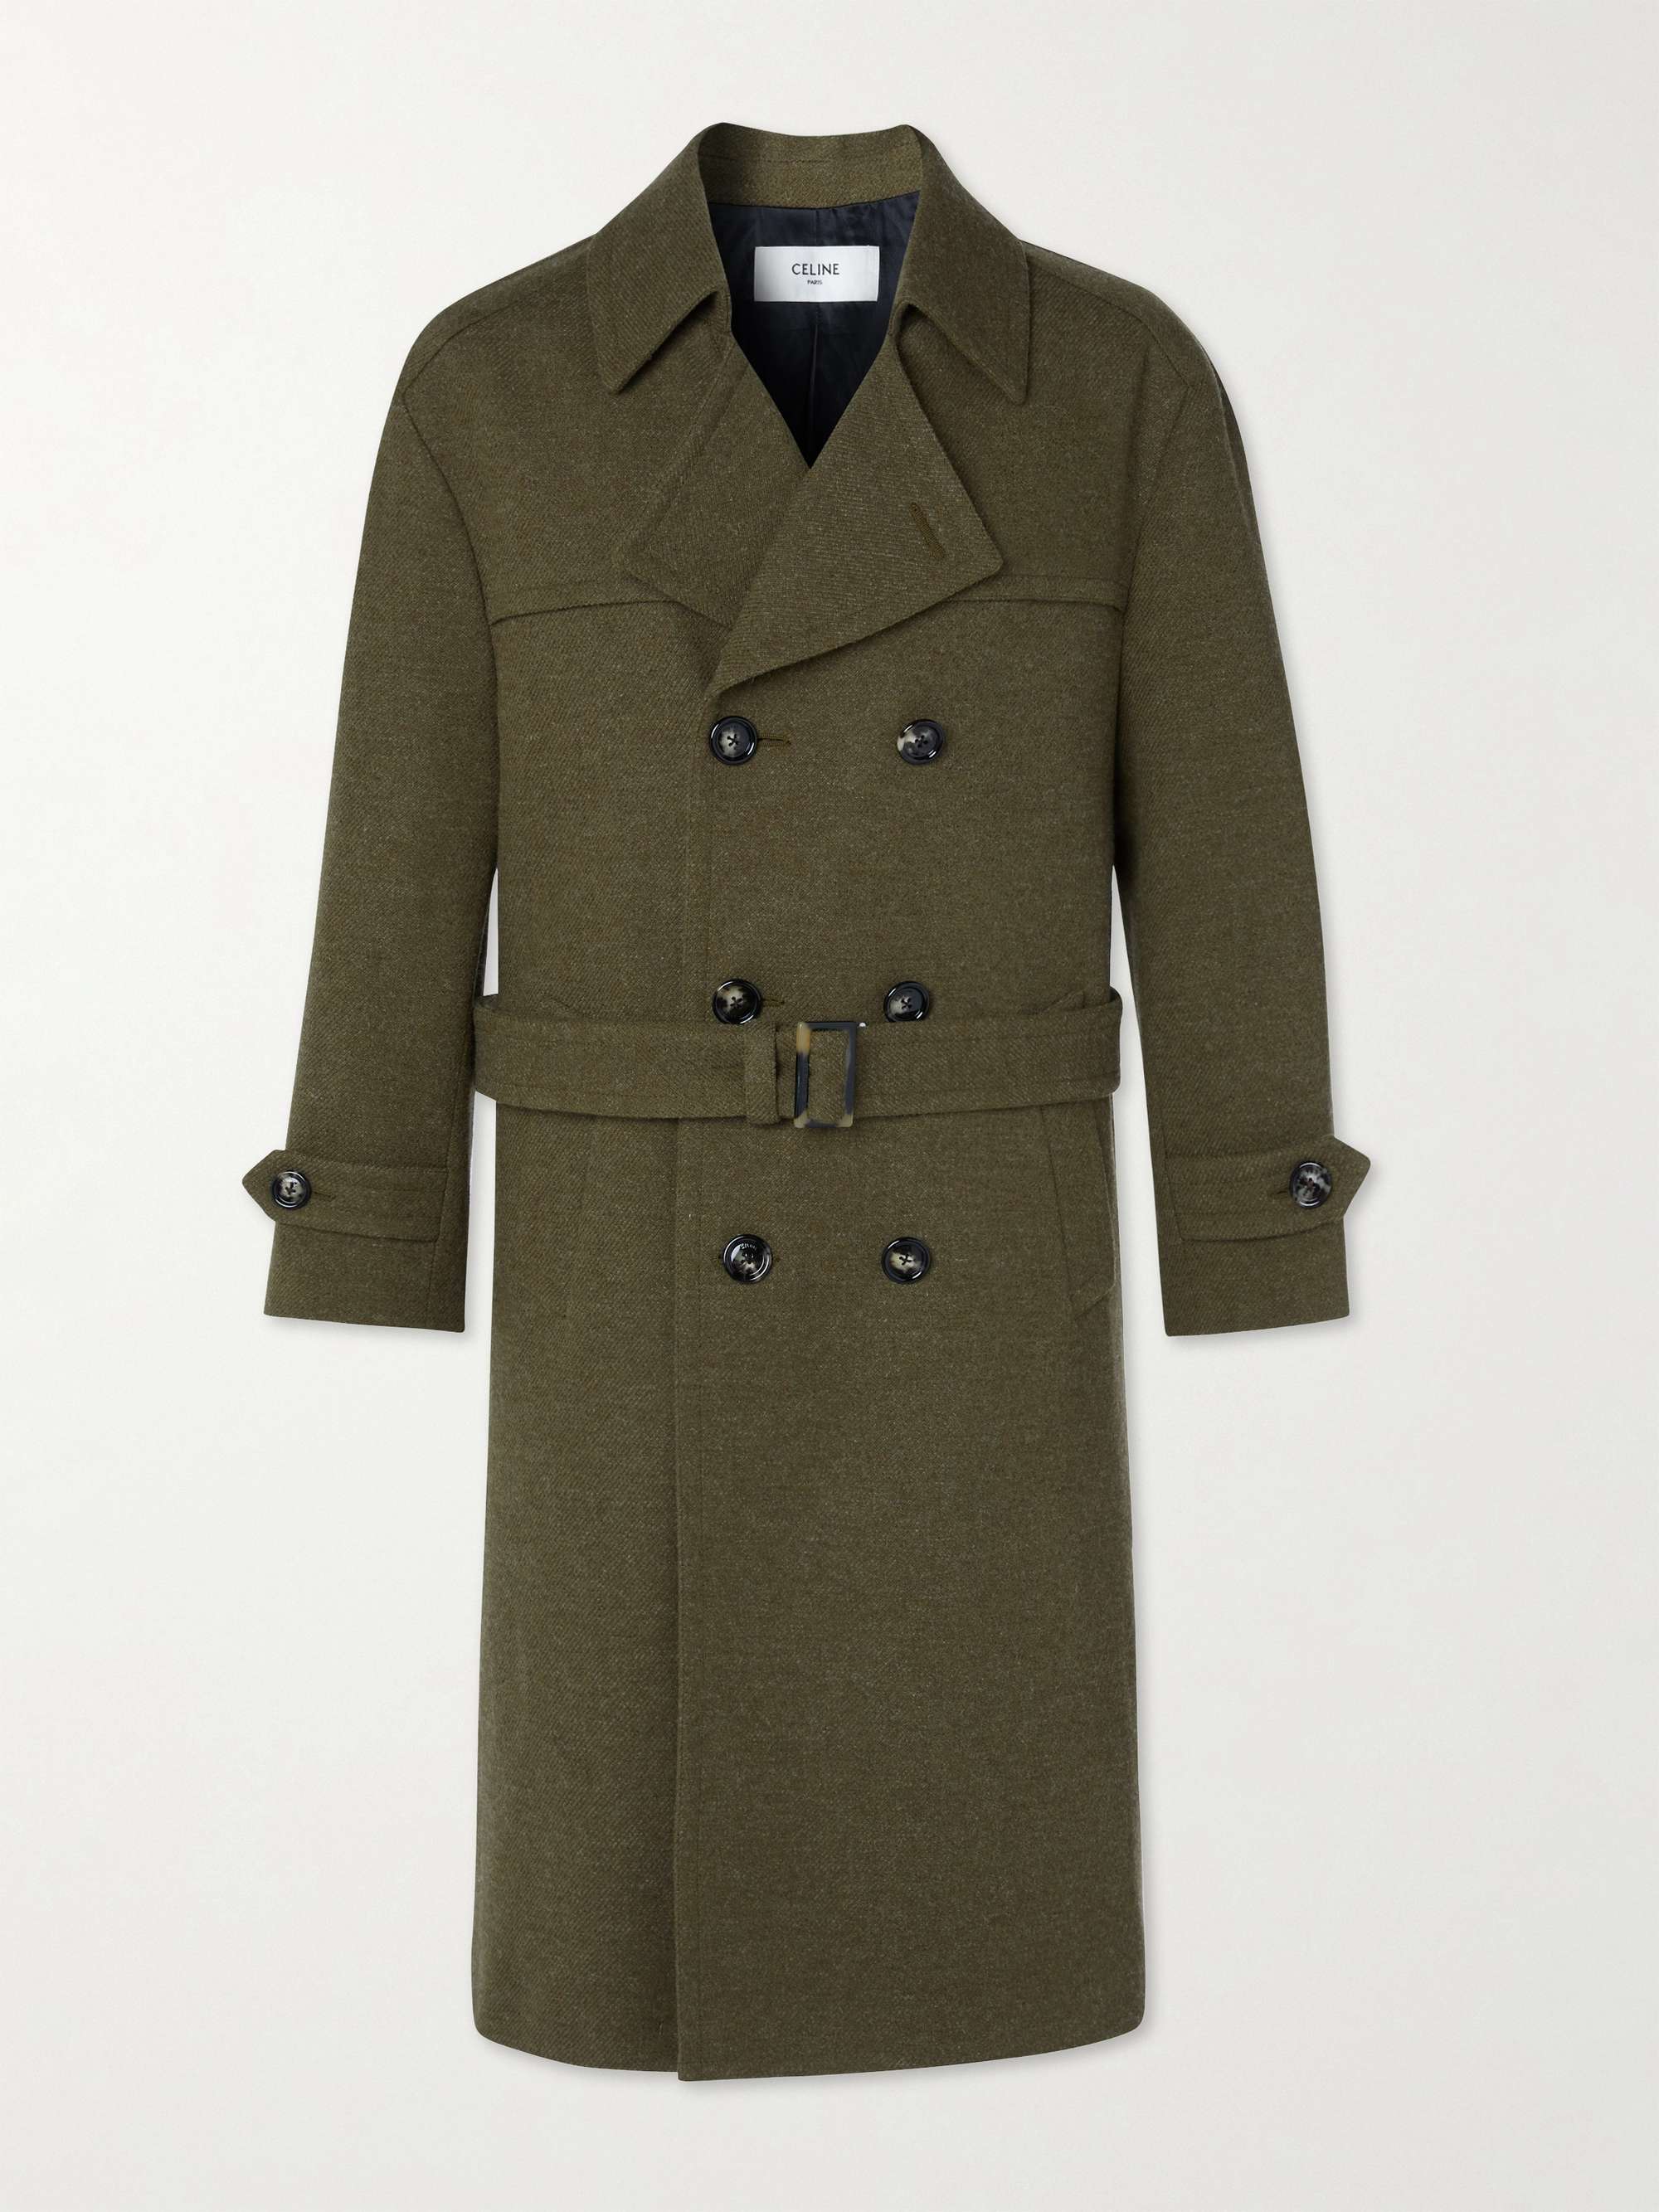 CELINE Oversized Double-Breasted Wool Trench Coat